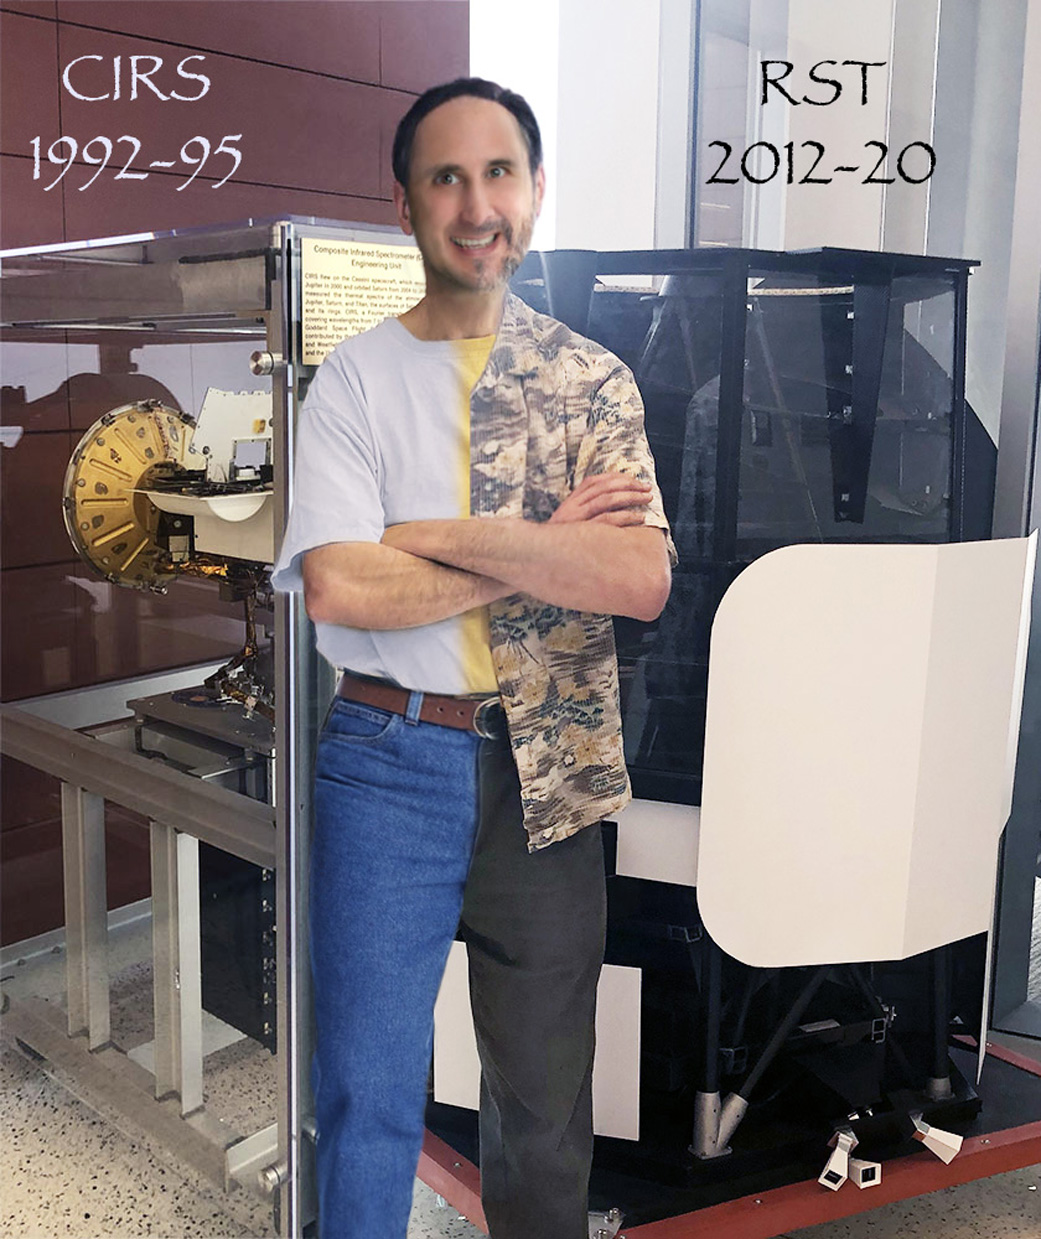 Then and Now: Bert Pasquale poses in front of his first and most recent flight projects wearing half jeans and half black plants and half of a white t shirt and half of a short sleeved button down.